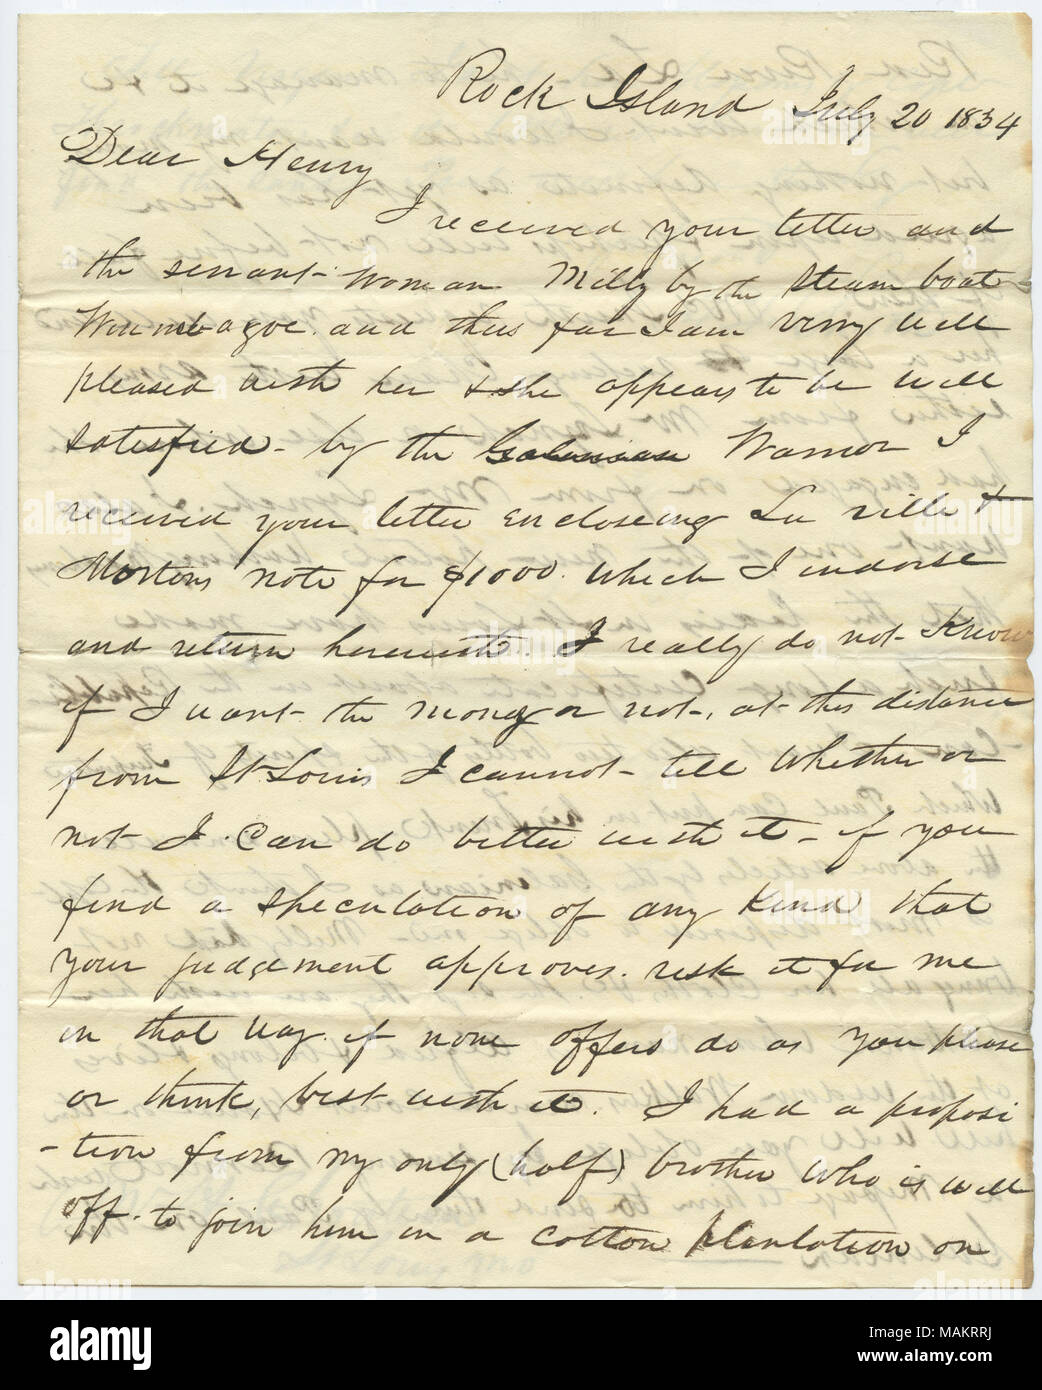 Has received letter and servant-woman, Milly, by Steamboat Winnebago. Asks Chouteau to look out for speculations for him. Mentions an opportunity to join his brother in a cotton plantation venture on Red River, Louisiana. Mentions Laville and Morton, Mrs. Smith, Mr. Lynch, The Republican, Paul, Widow Walker, Alfred, Bennoit, Virginia, and Captain Throckmorton. Title: Letter signed T.F. Smith, Rock Island, to Henry Chouteau, St. Louis, Mo., July 20, 1834  . 20 July 1834. Smith, T.F. Stock Photo